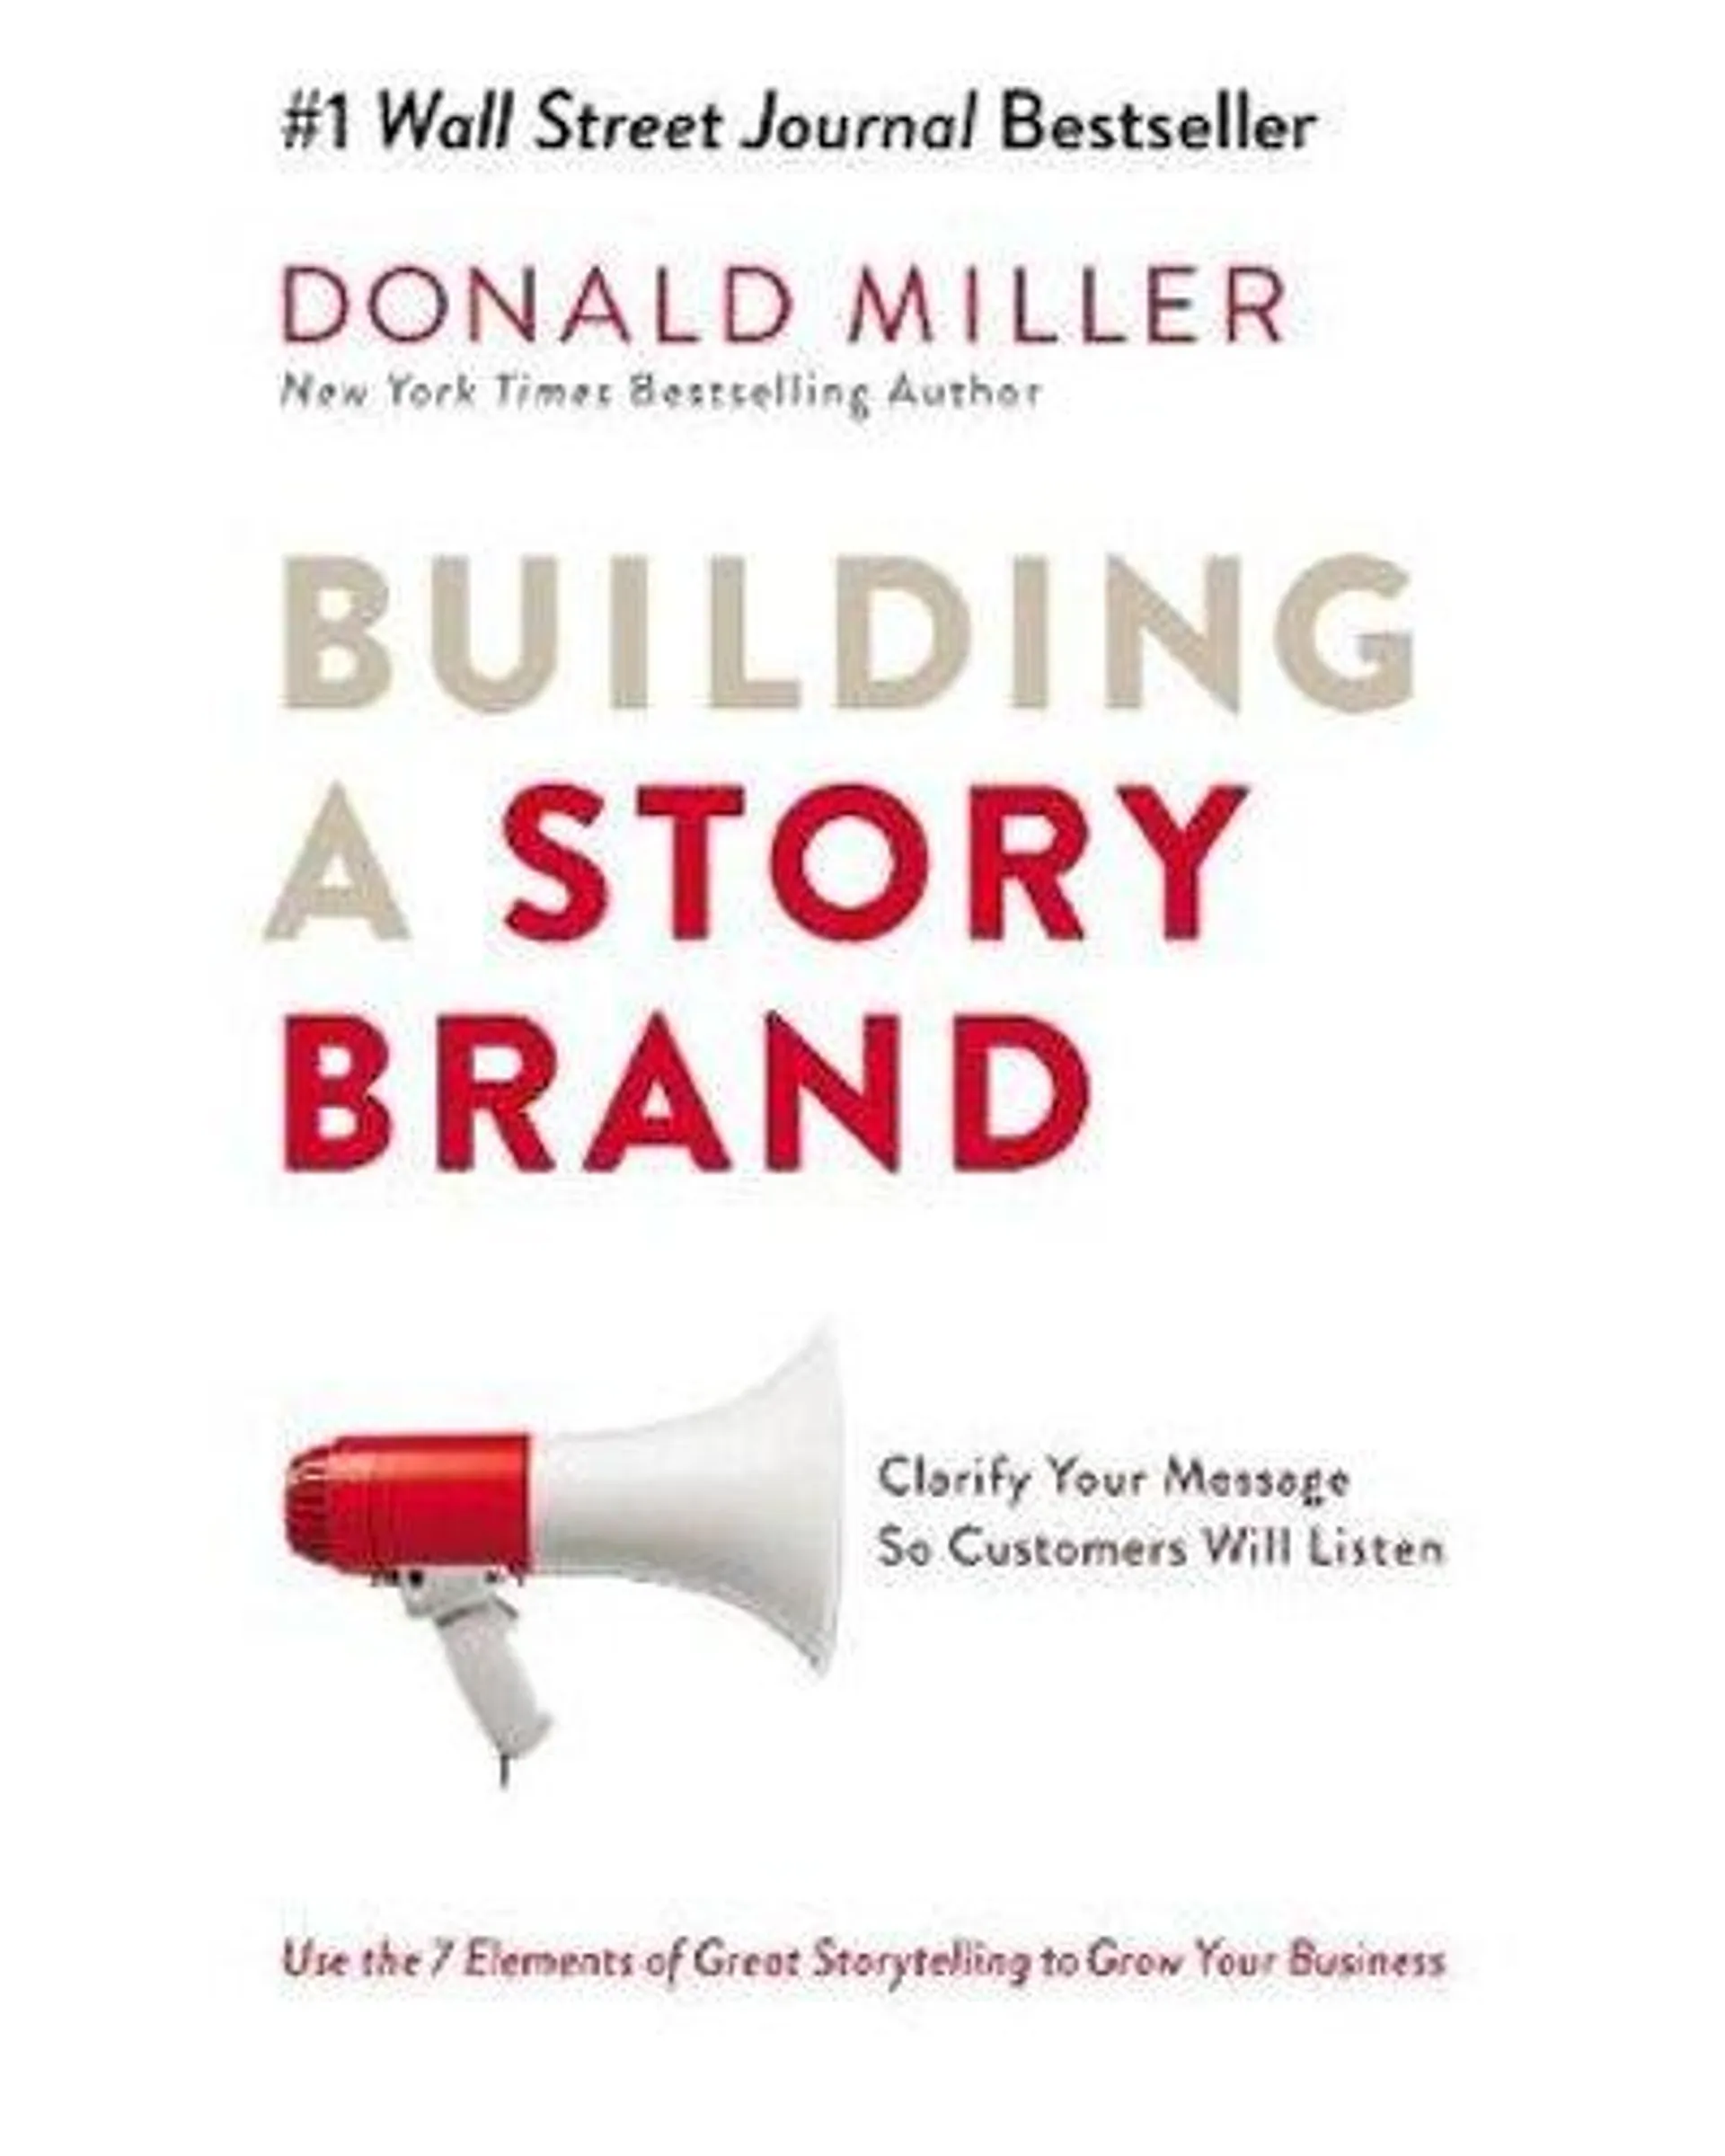 Building a Storybrand - Clarify Your Message So Customers Will Listen (Paperback, International Edition)